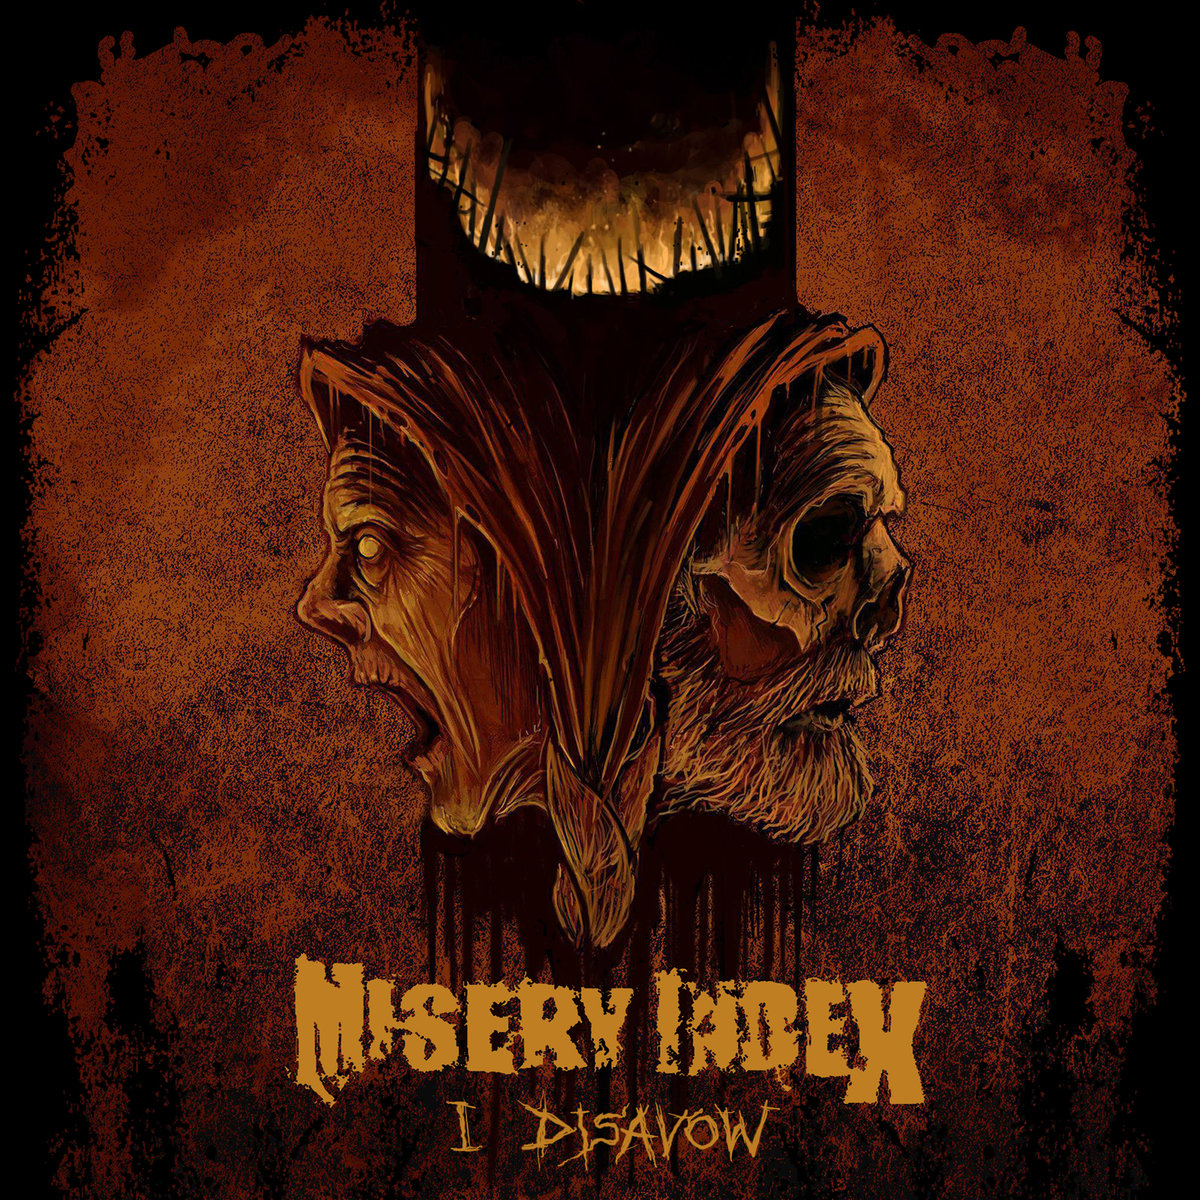 MISERY INDEX nuevo EP “I Disavow” en streaming